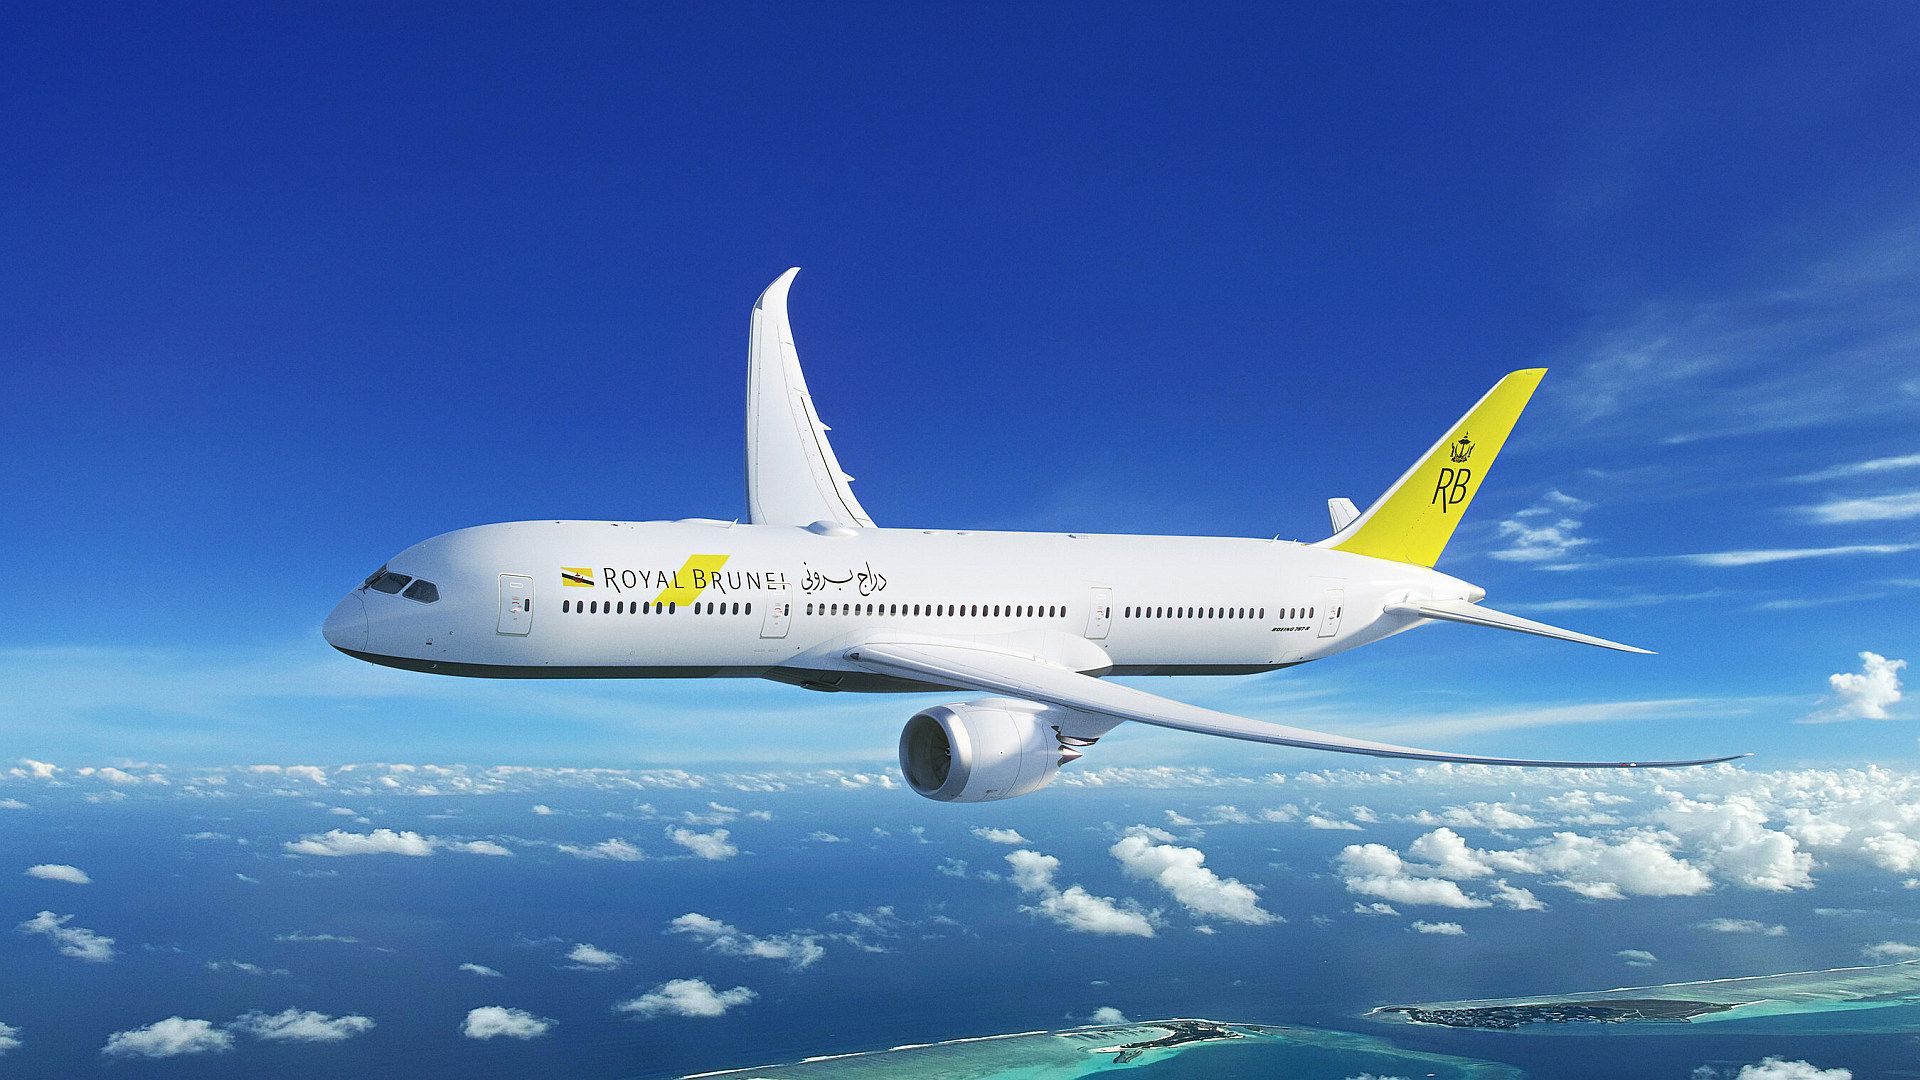 Boeing Royal Brunei Airlines